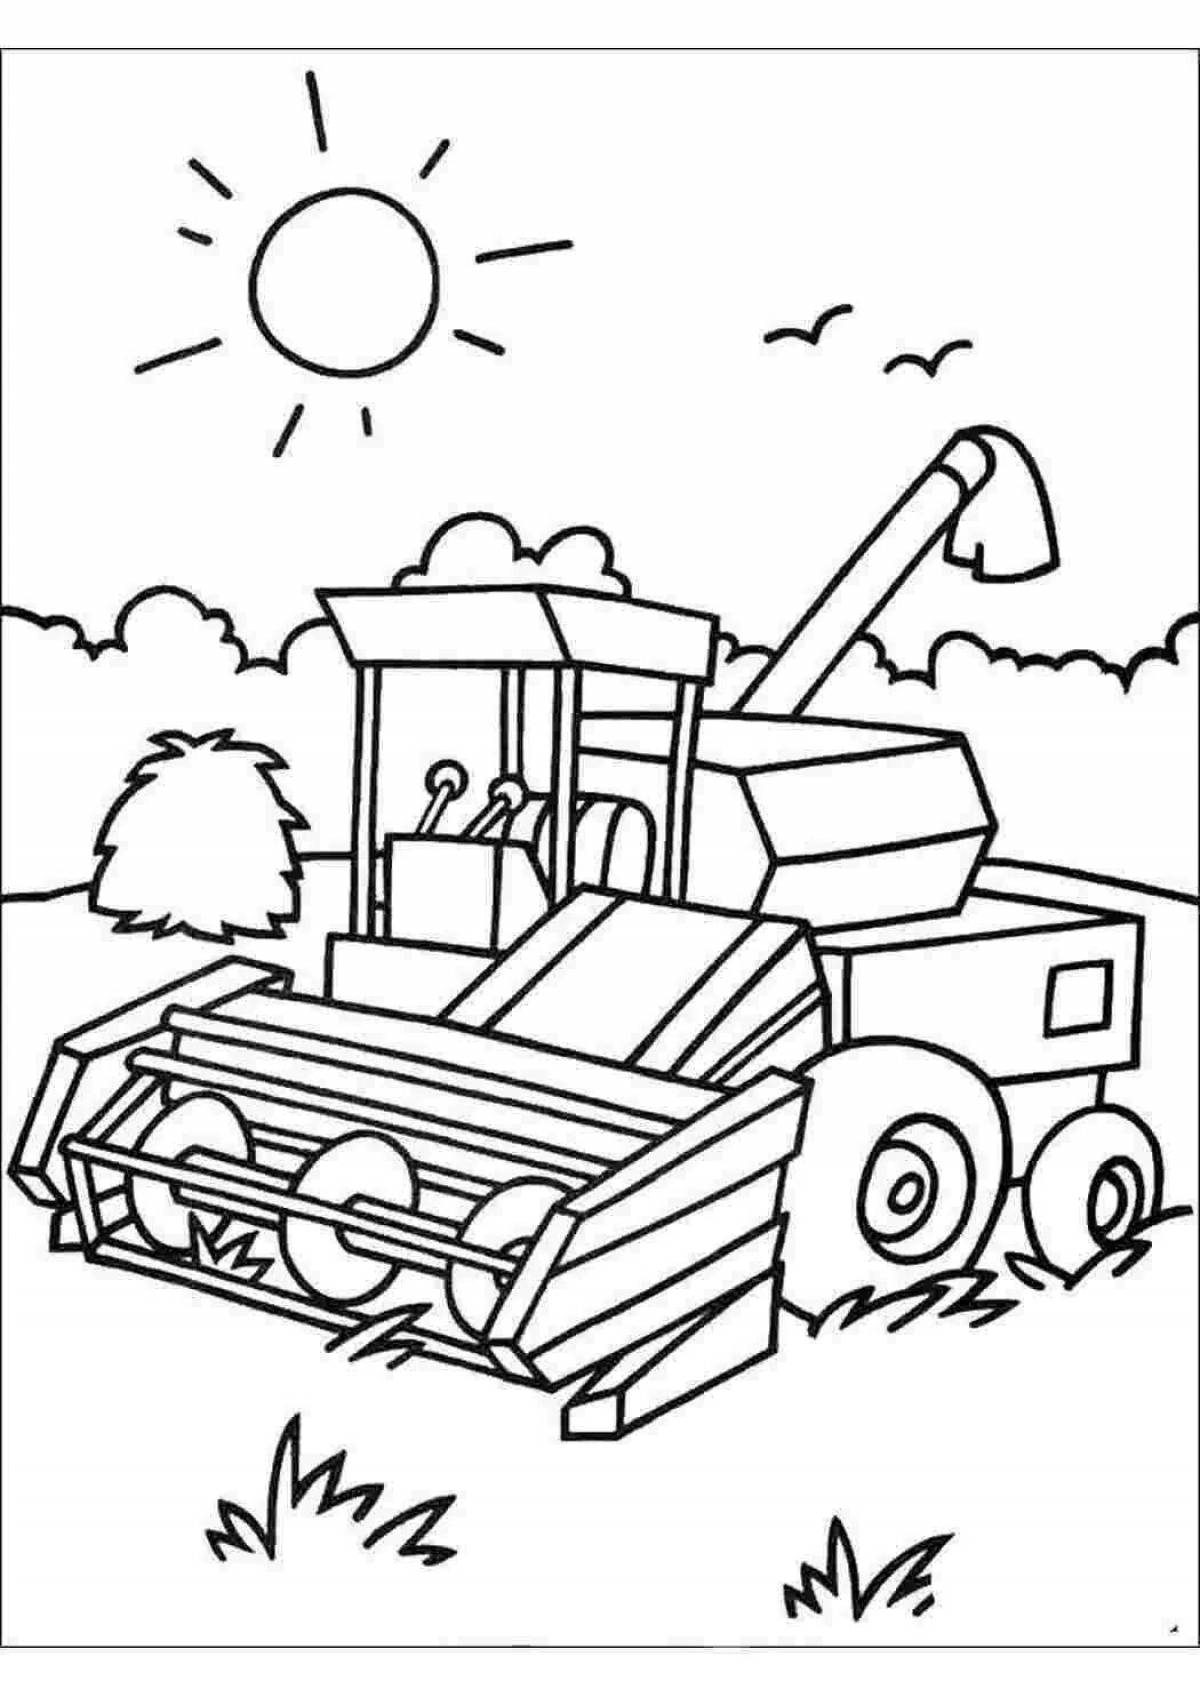 Stimulating coloring pages of agricultural machinery for children